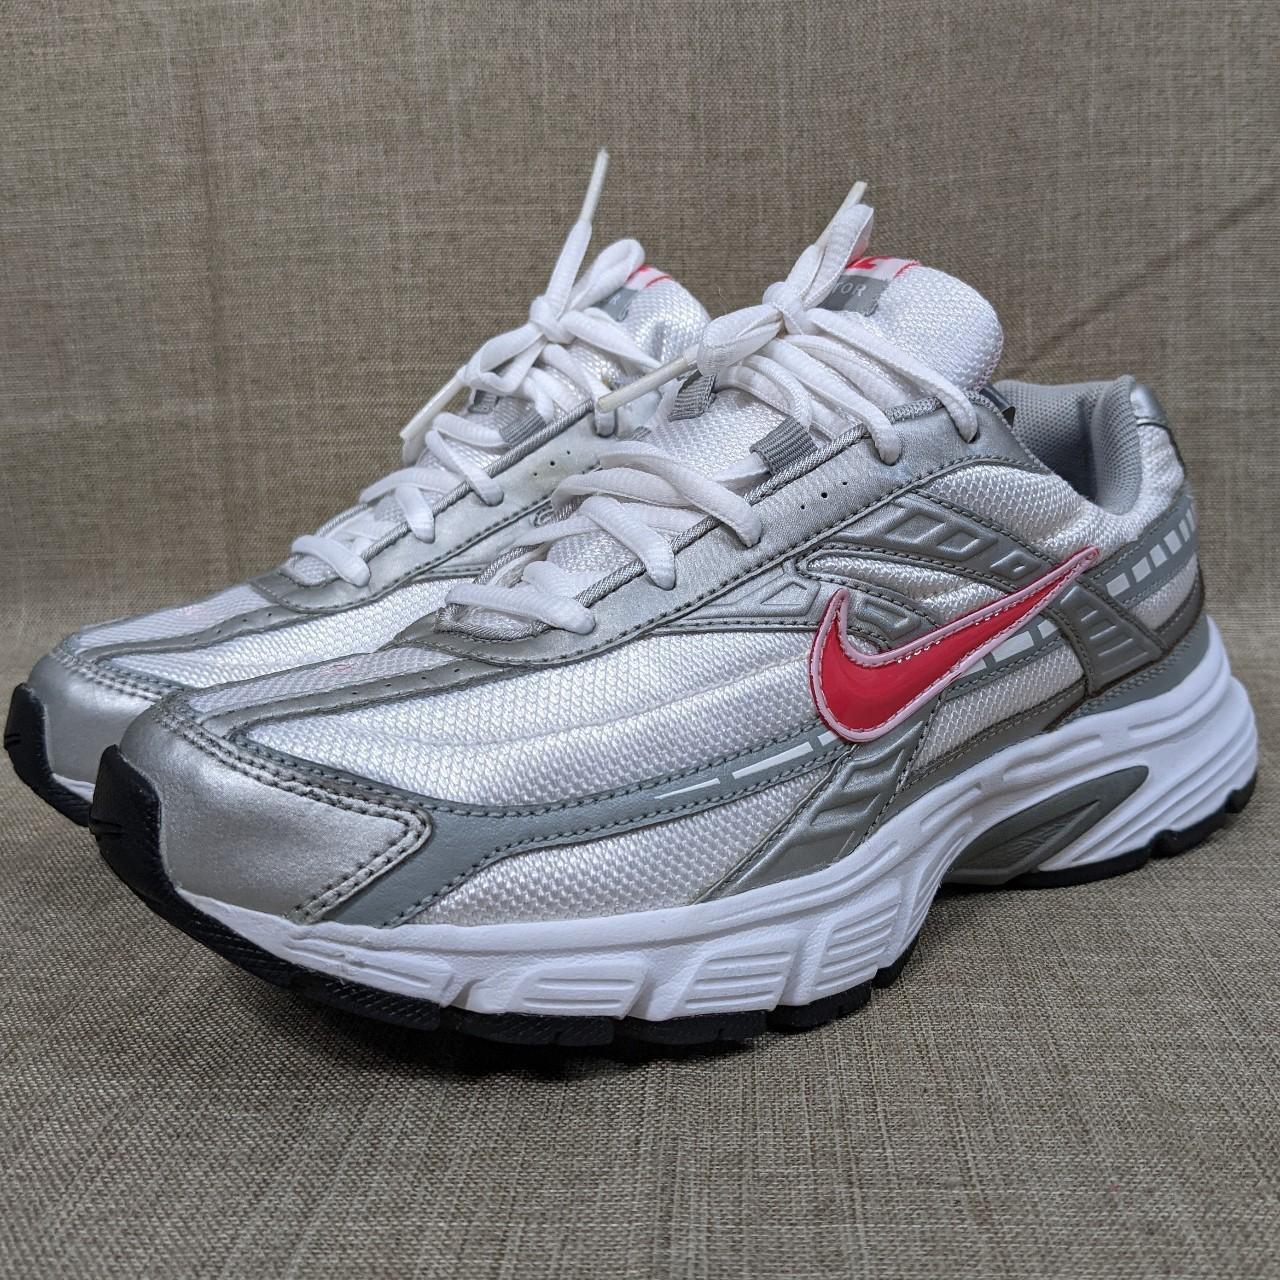 Product Image 1 - Nike women's chunky dad sneakers.

Women's